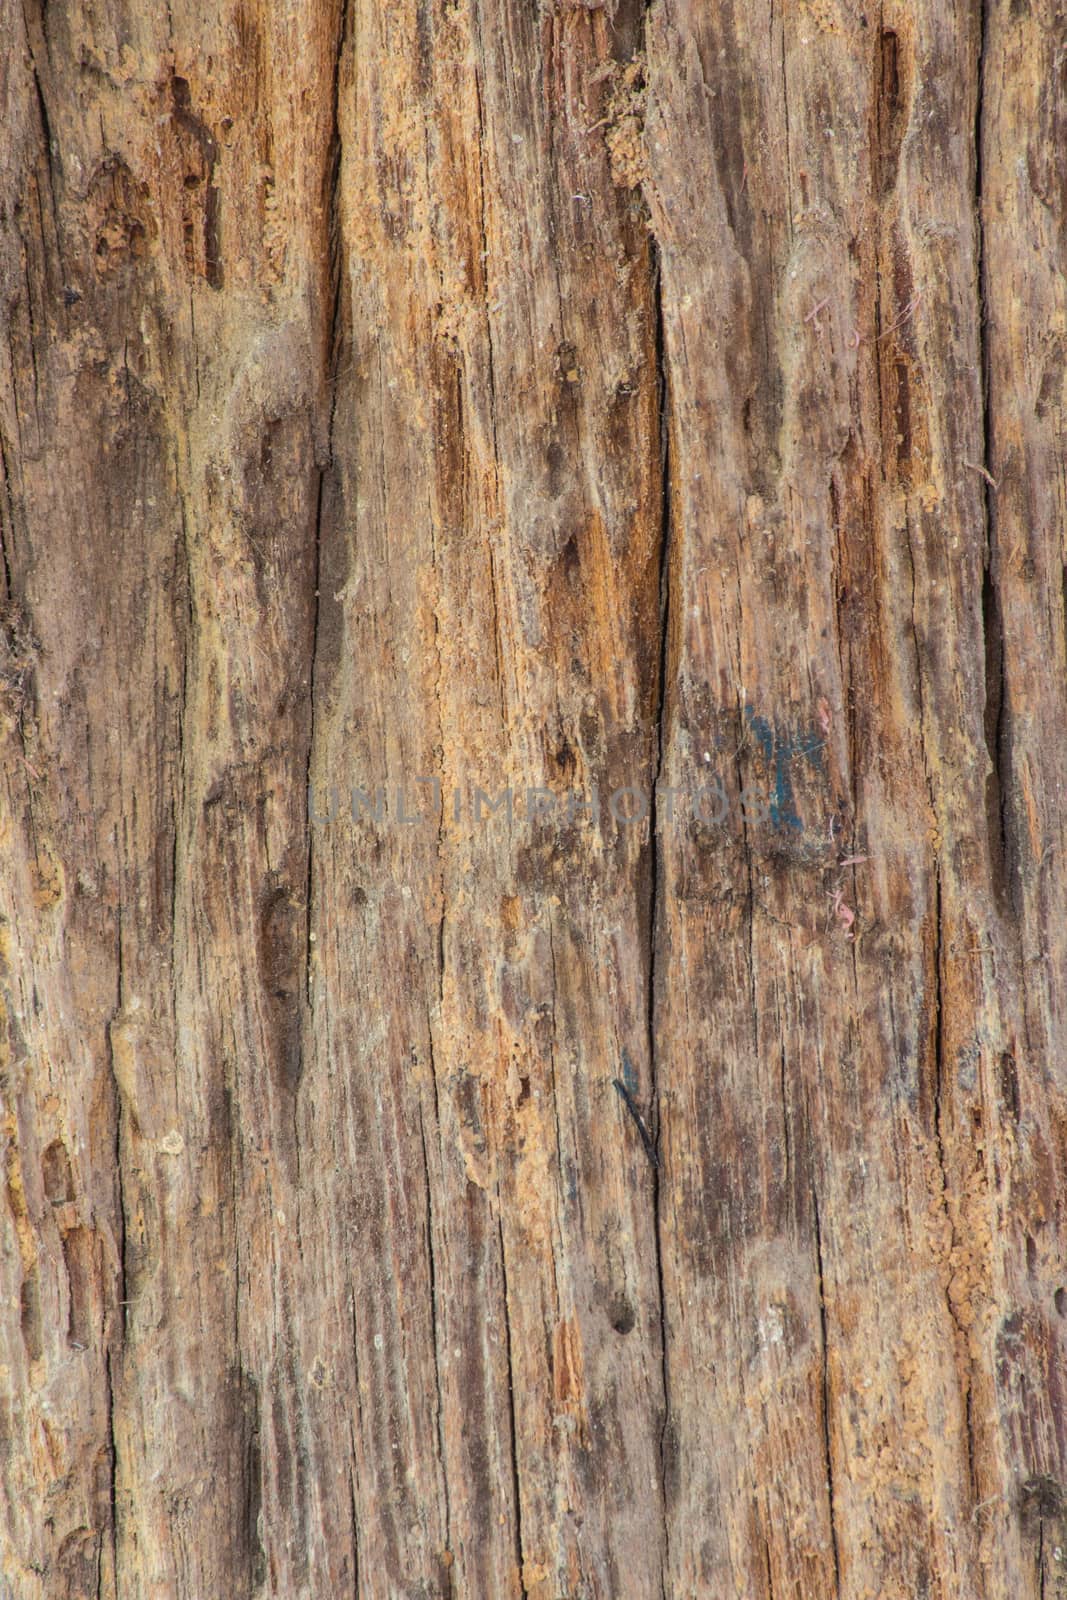 Old wooden plank with termites damage by peerapixs